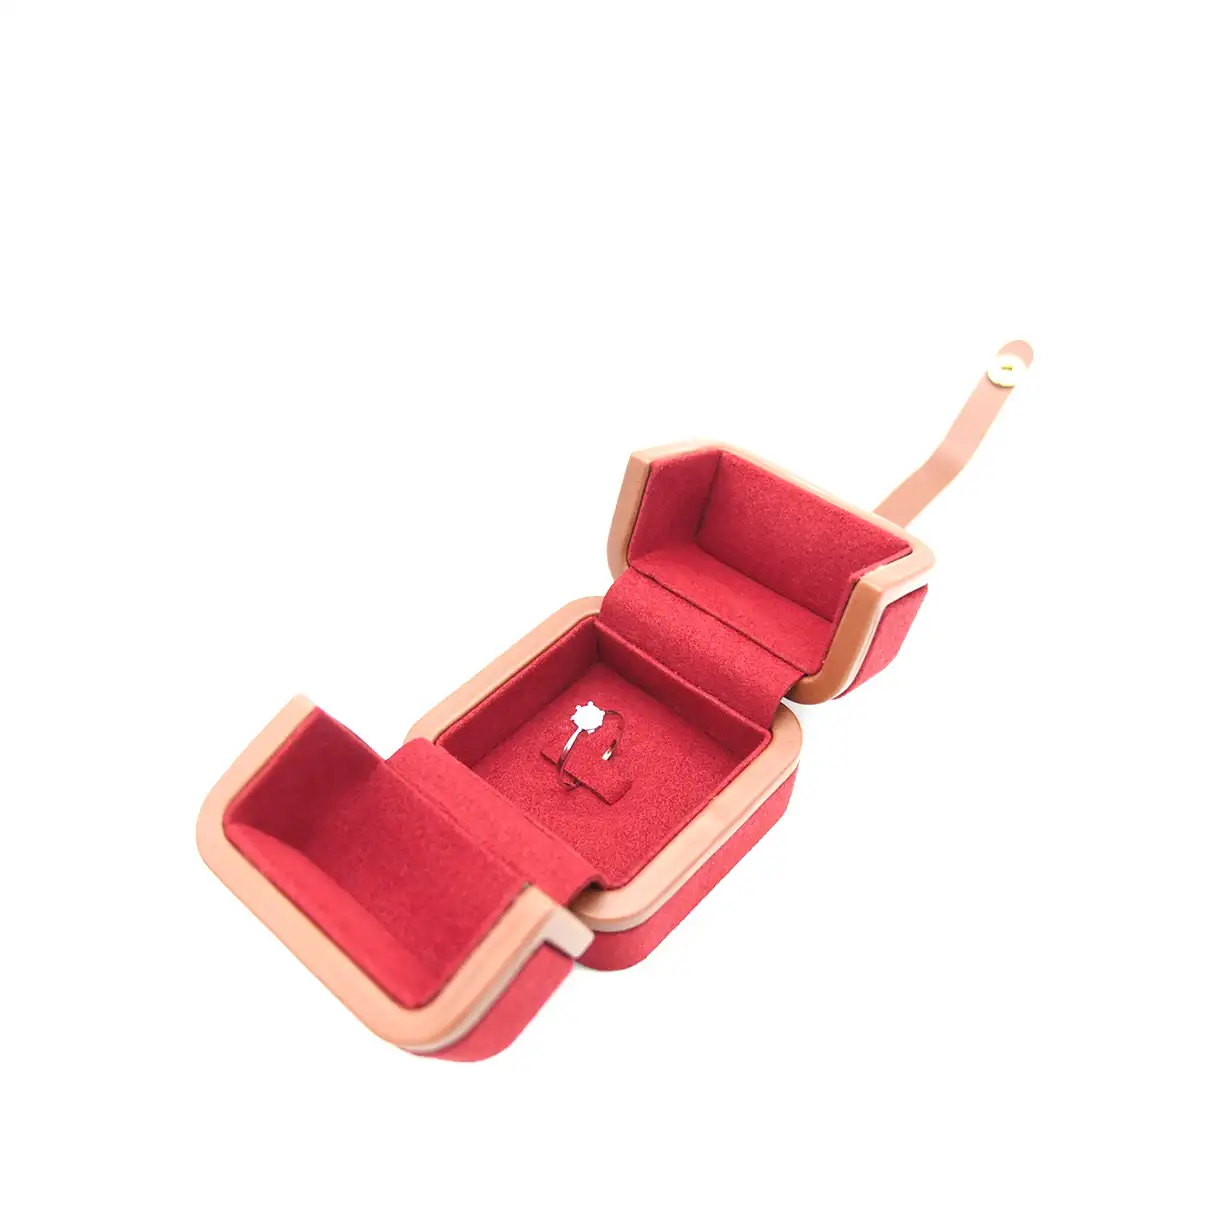 valerie ring box in red opening right side view